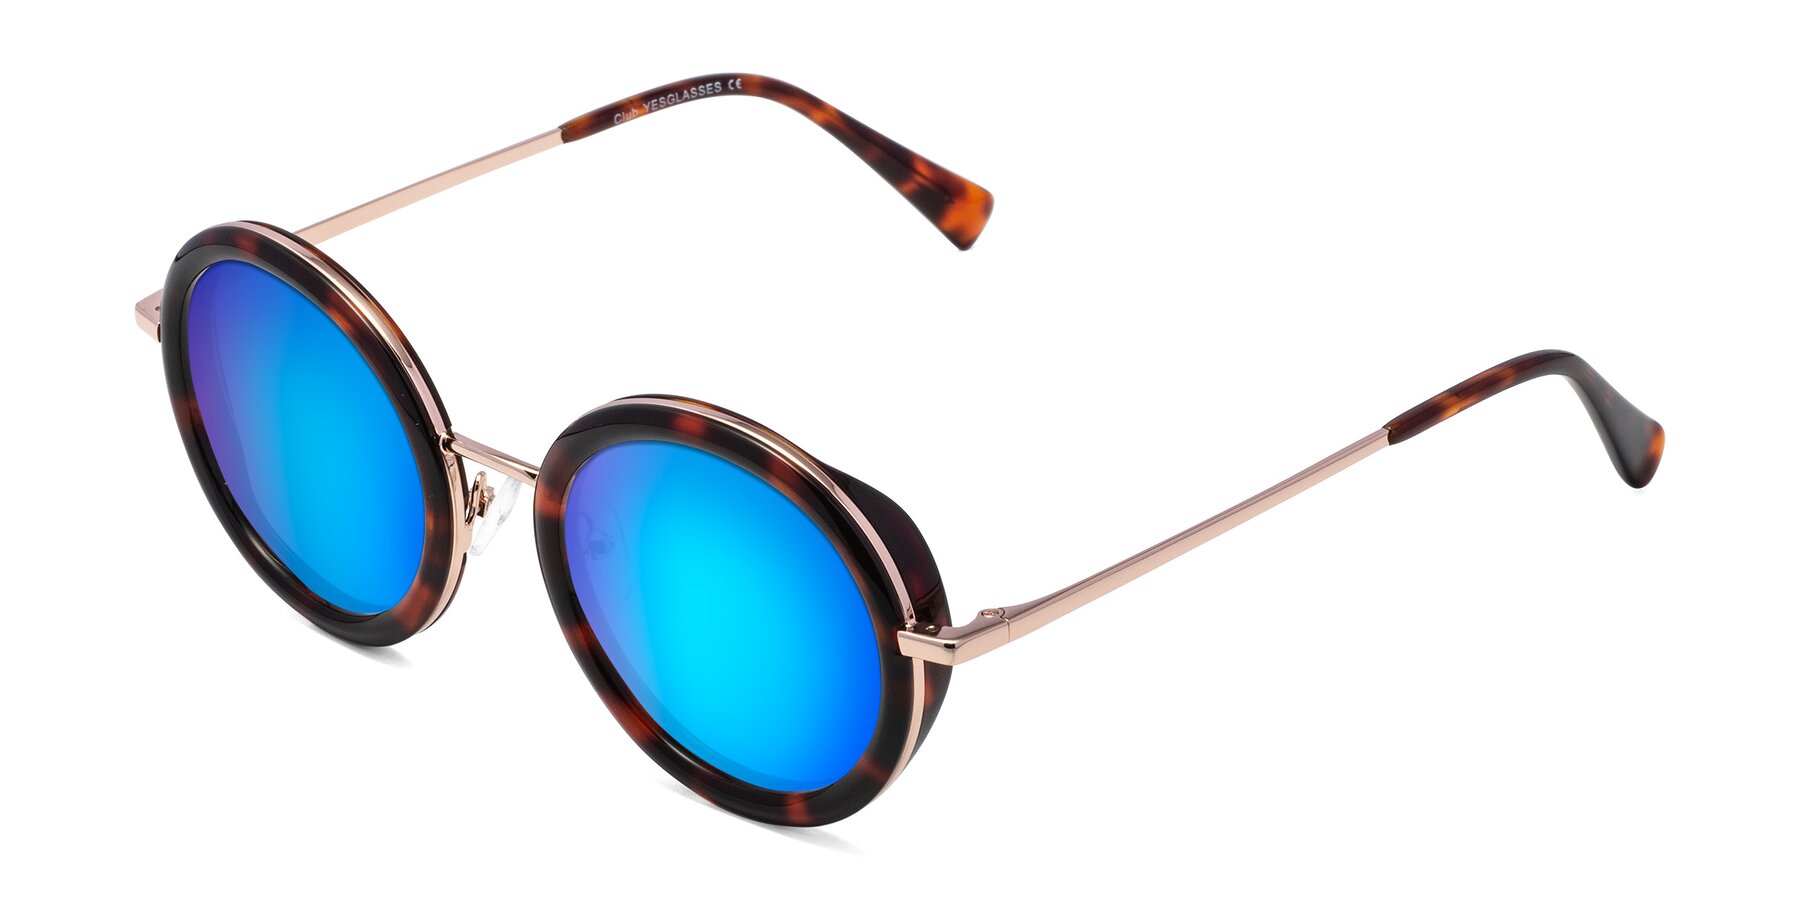 Angle of Club in Tortoise-Rose Gold with Blue Mirrored Lenses